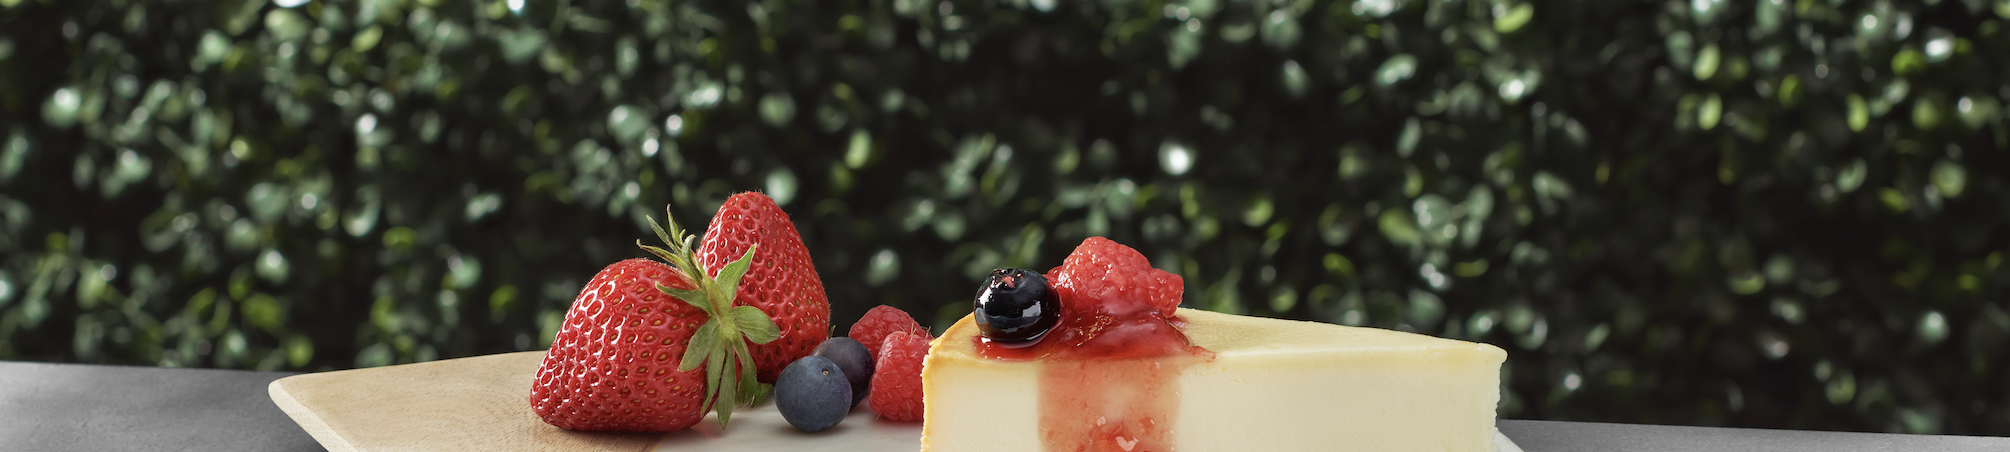 Cheesecake topped with berries, in front of a bush